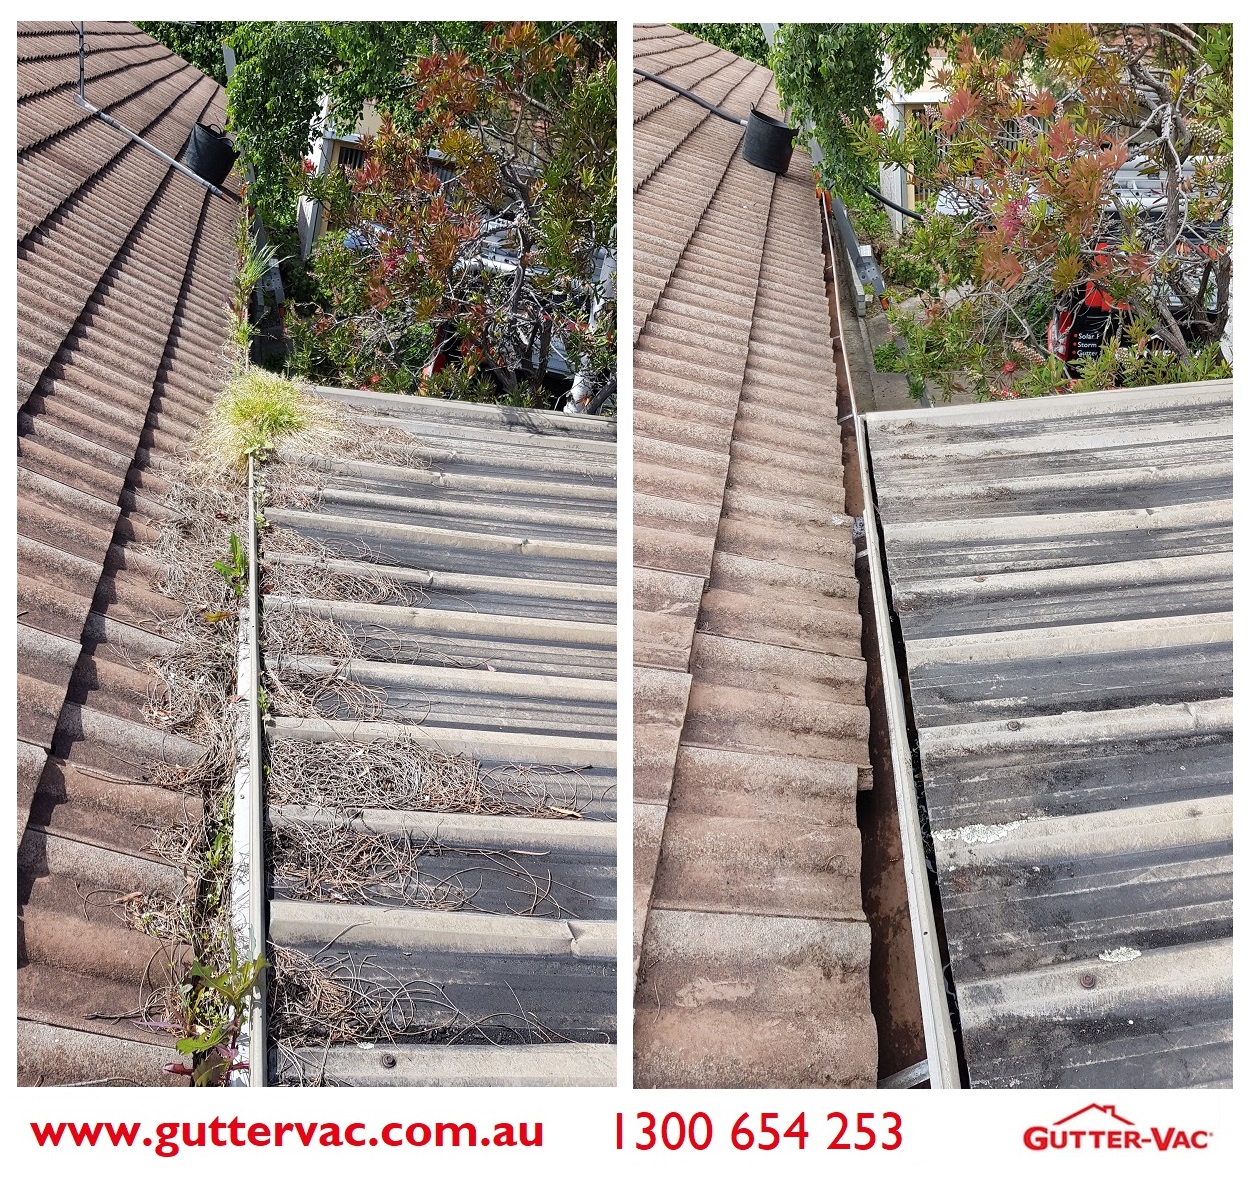 Glenorchy Gutters in Desperate Need of a Clean